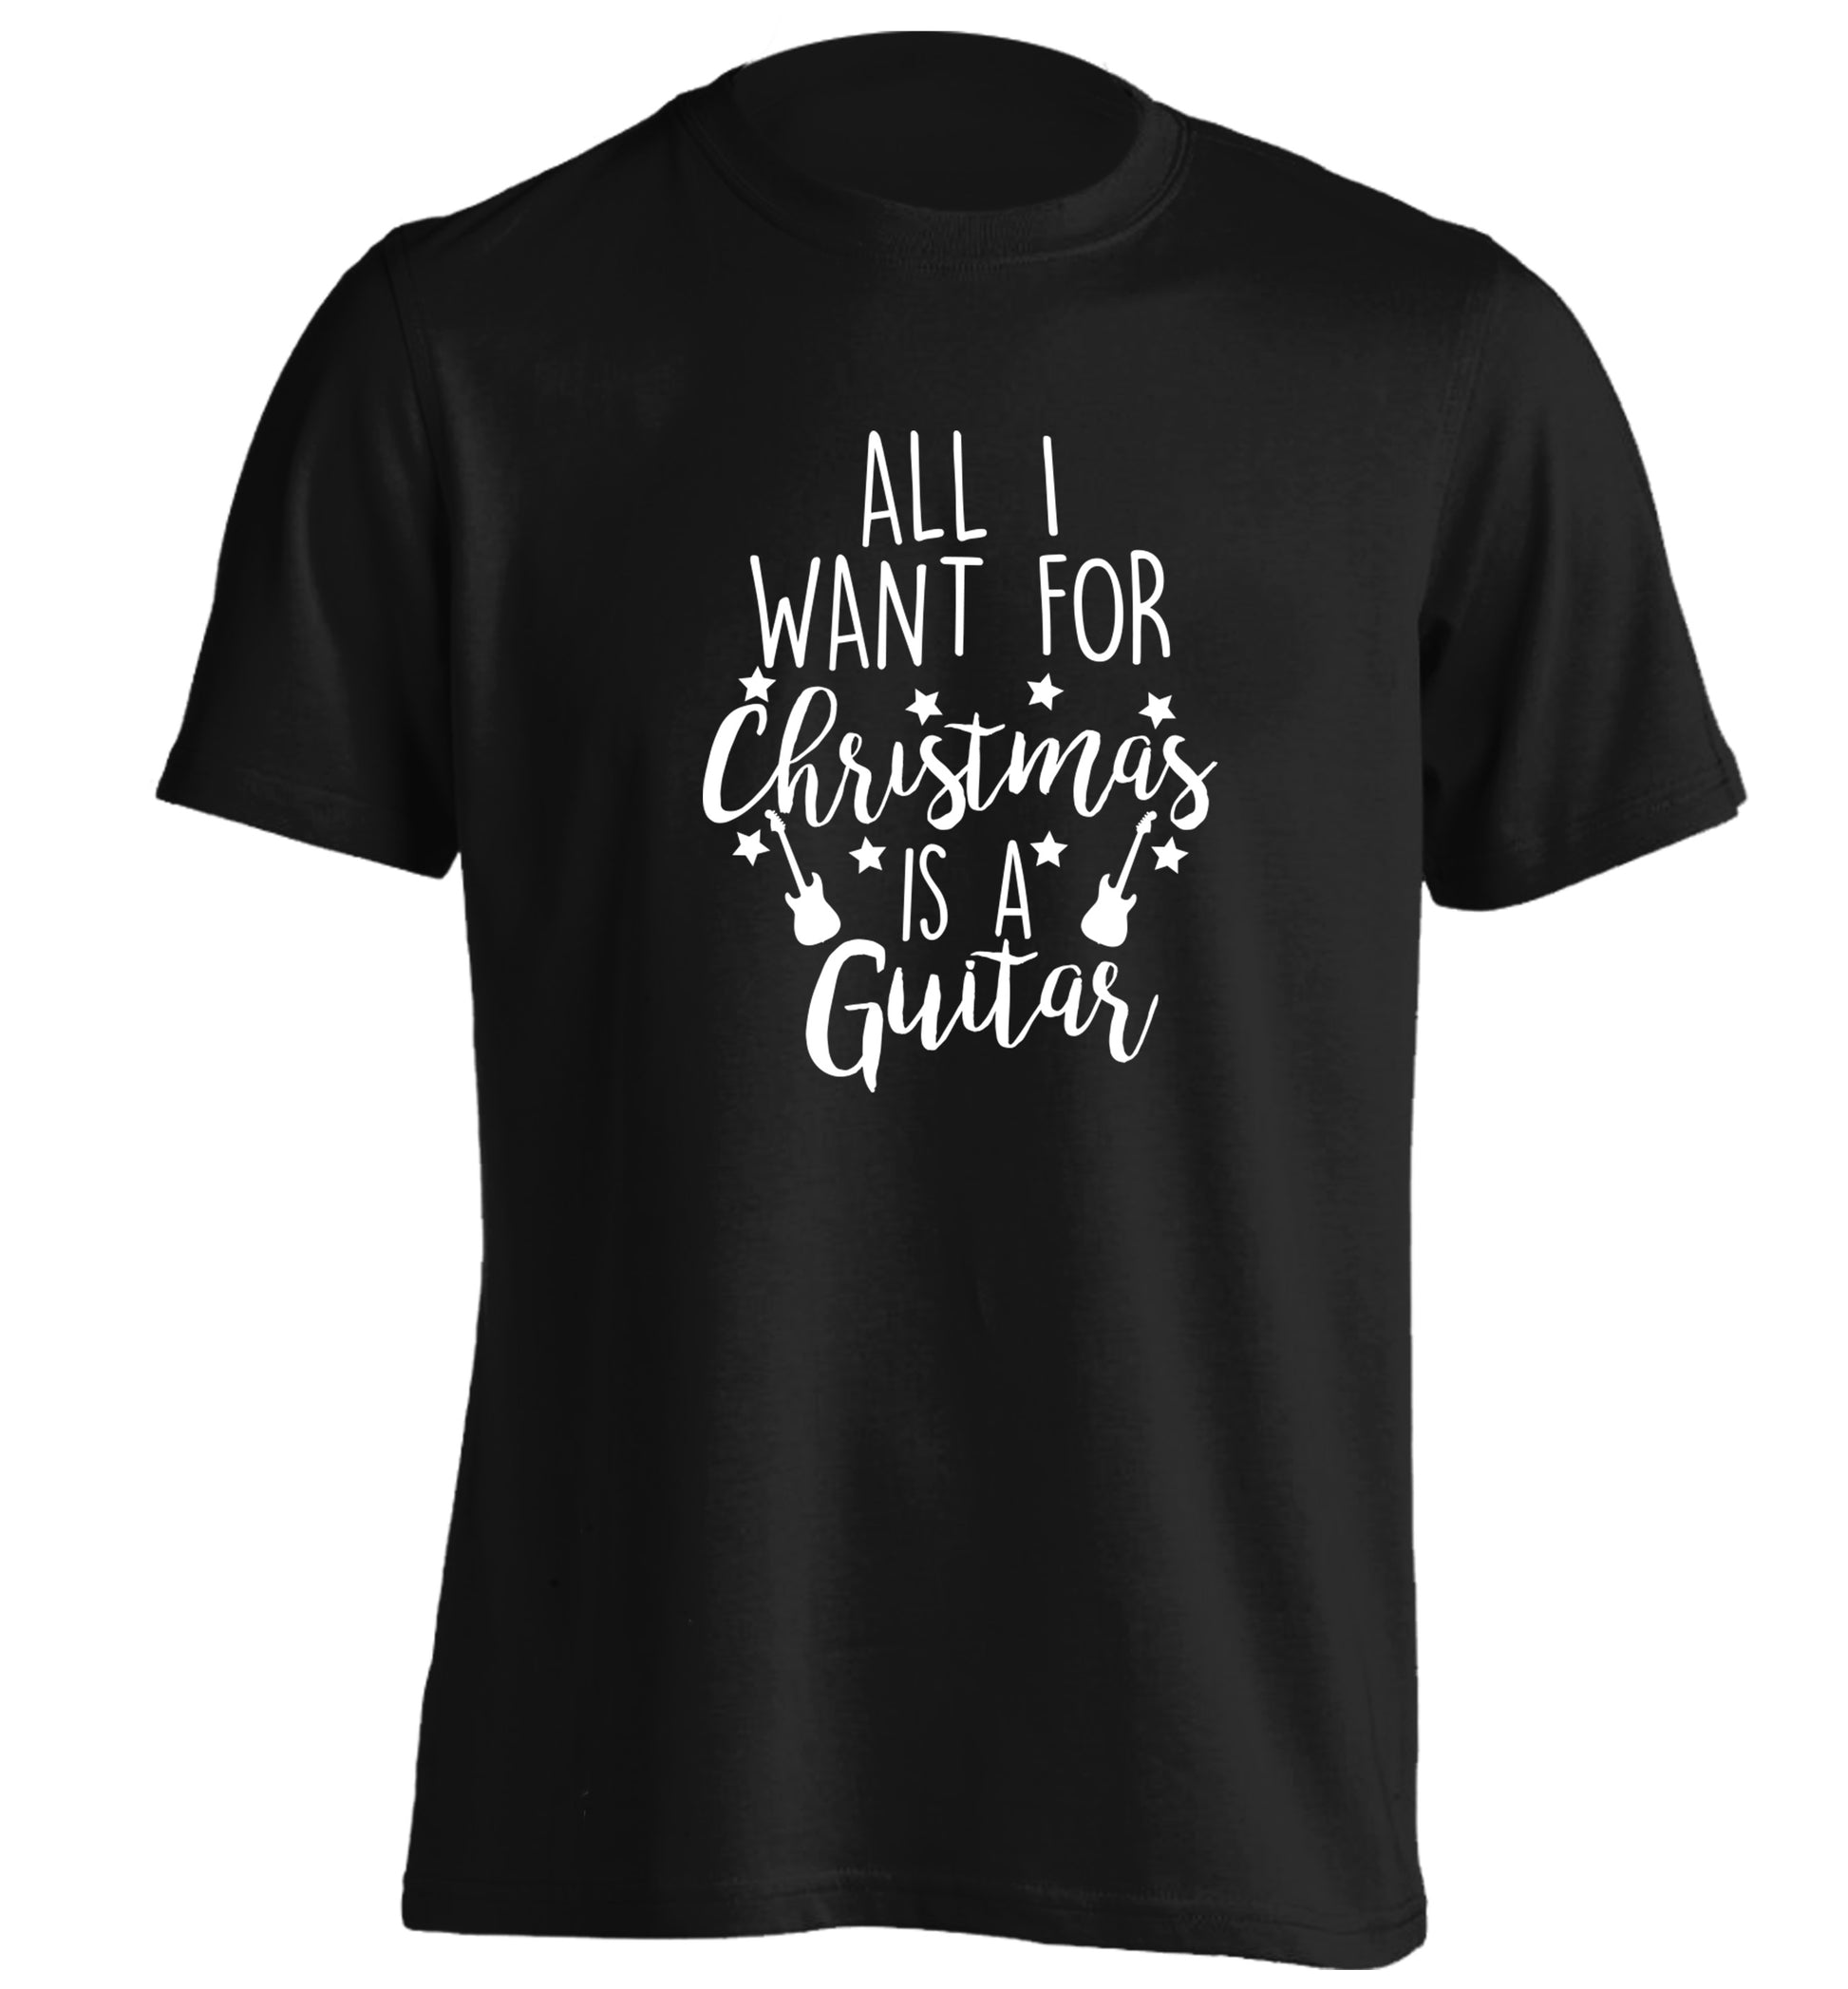 All I want for Christmas is a guitar adults unisex black Tshirt 2XL